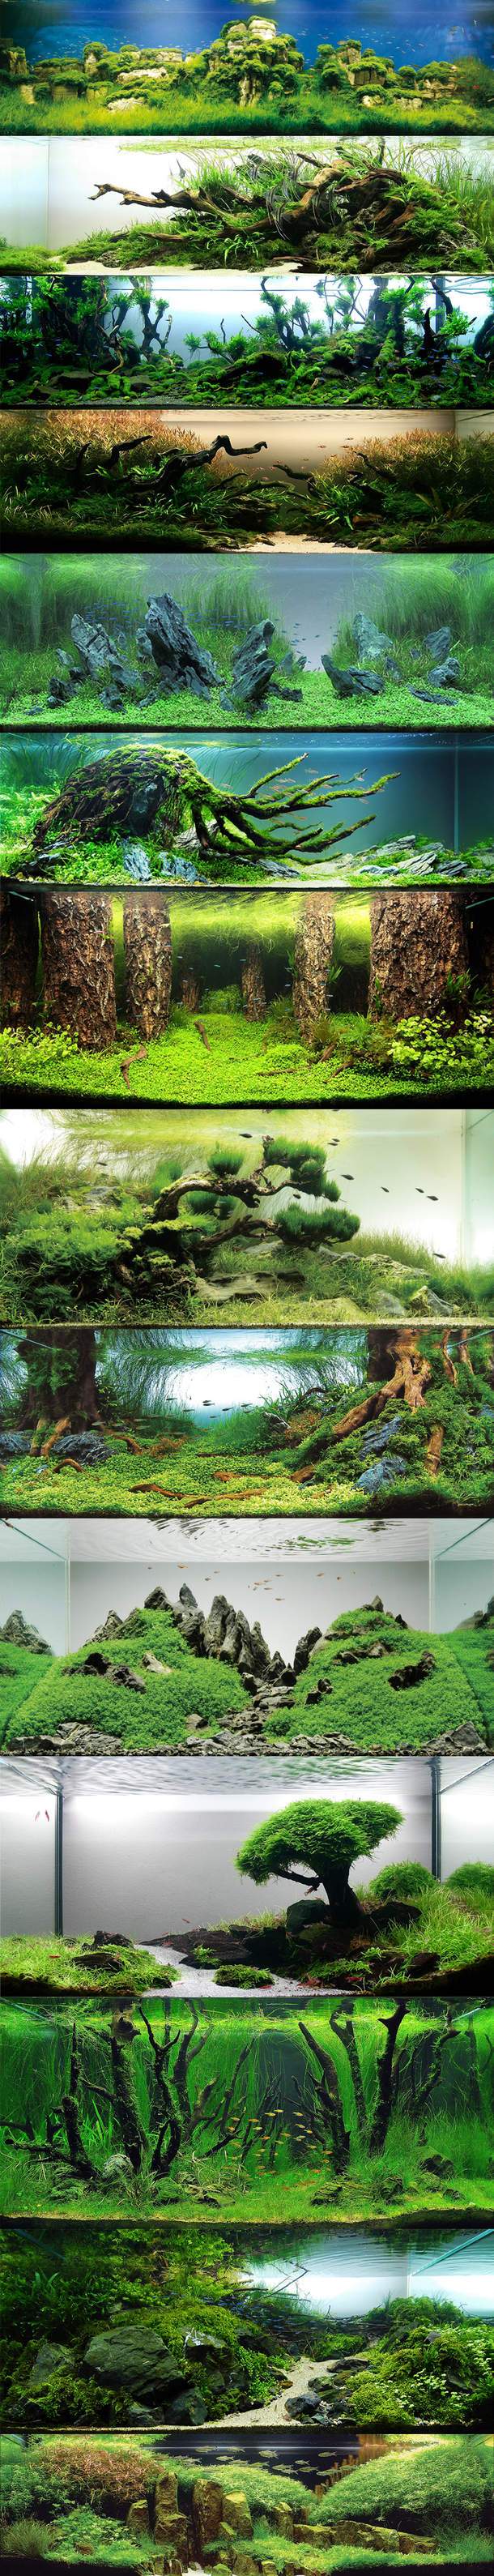 AQUASCAPE BUILD YOUR OWN MICRO ECOSYSTEM VERY COOL! u2014 Steemit